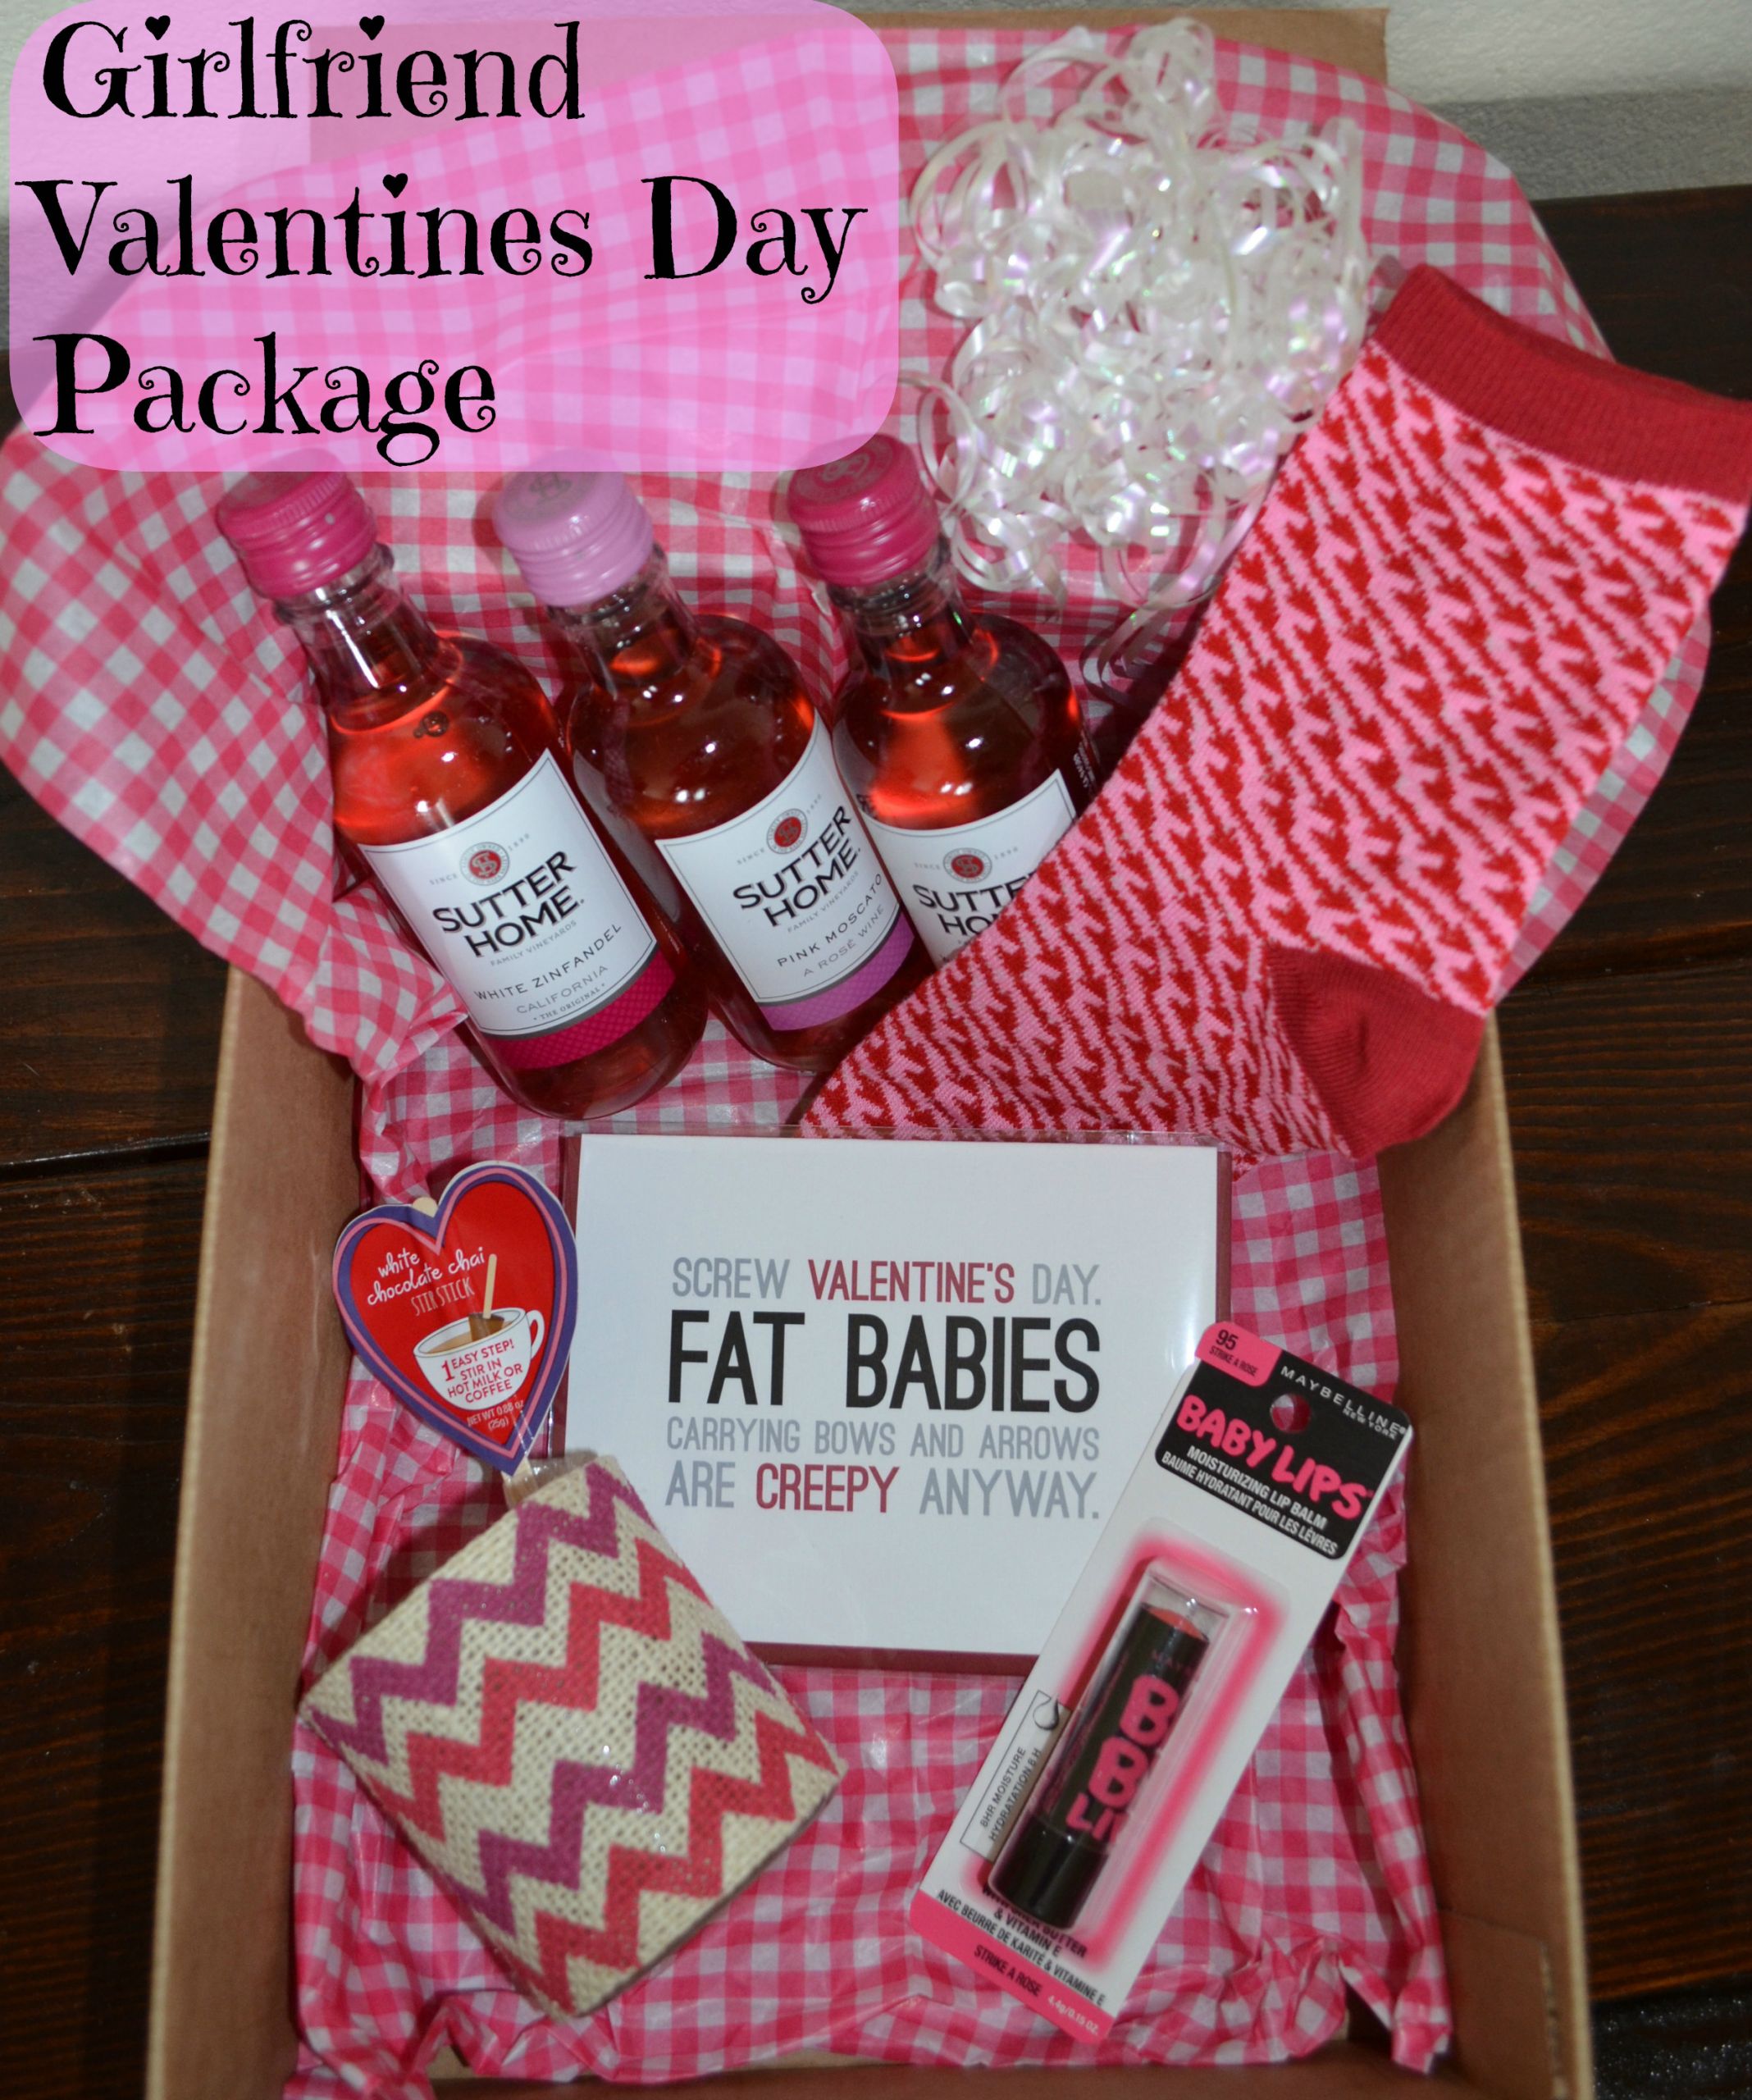 Cute Valentine Gift Ideas For Her
 24 ADORABLE GIFT IDEAS FOR THE WOMEN IN YOUR LIFE